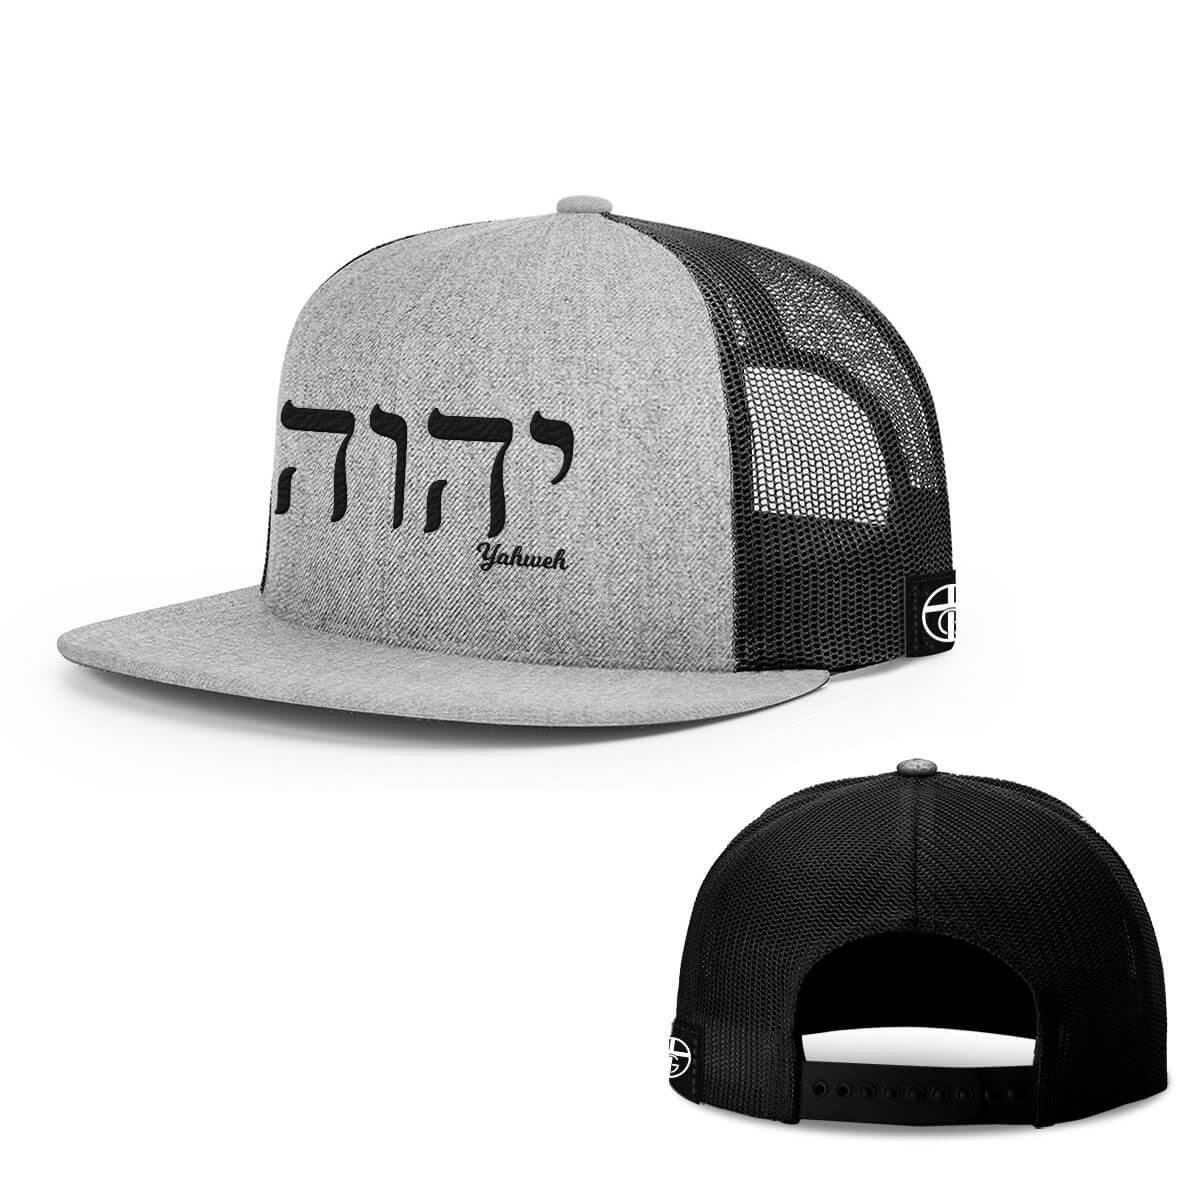 Yahweh Hats | Our True God